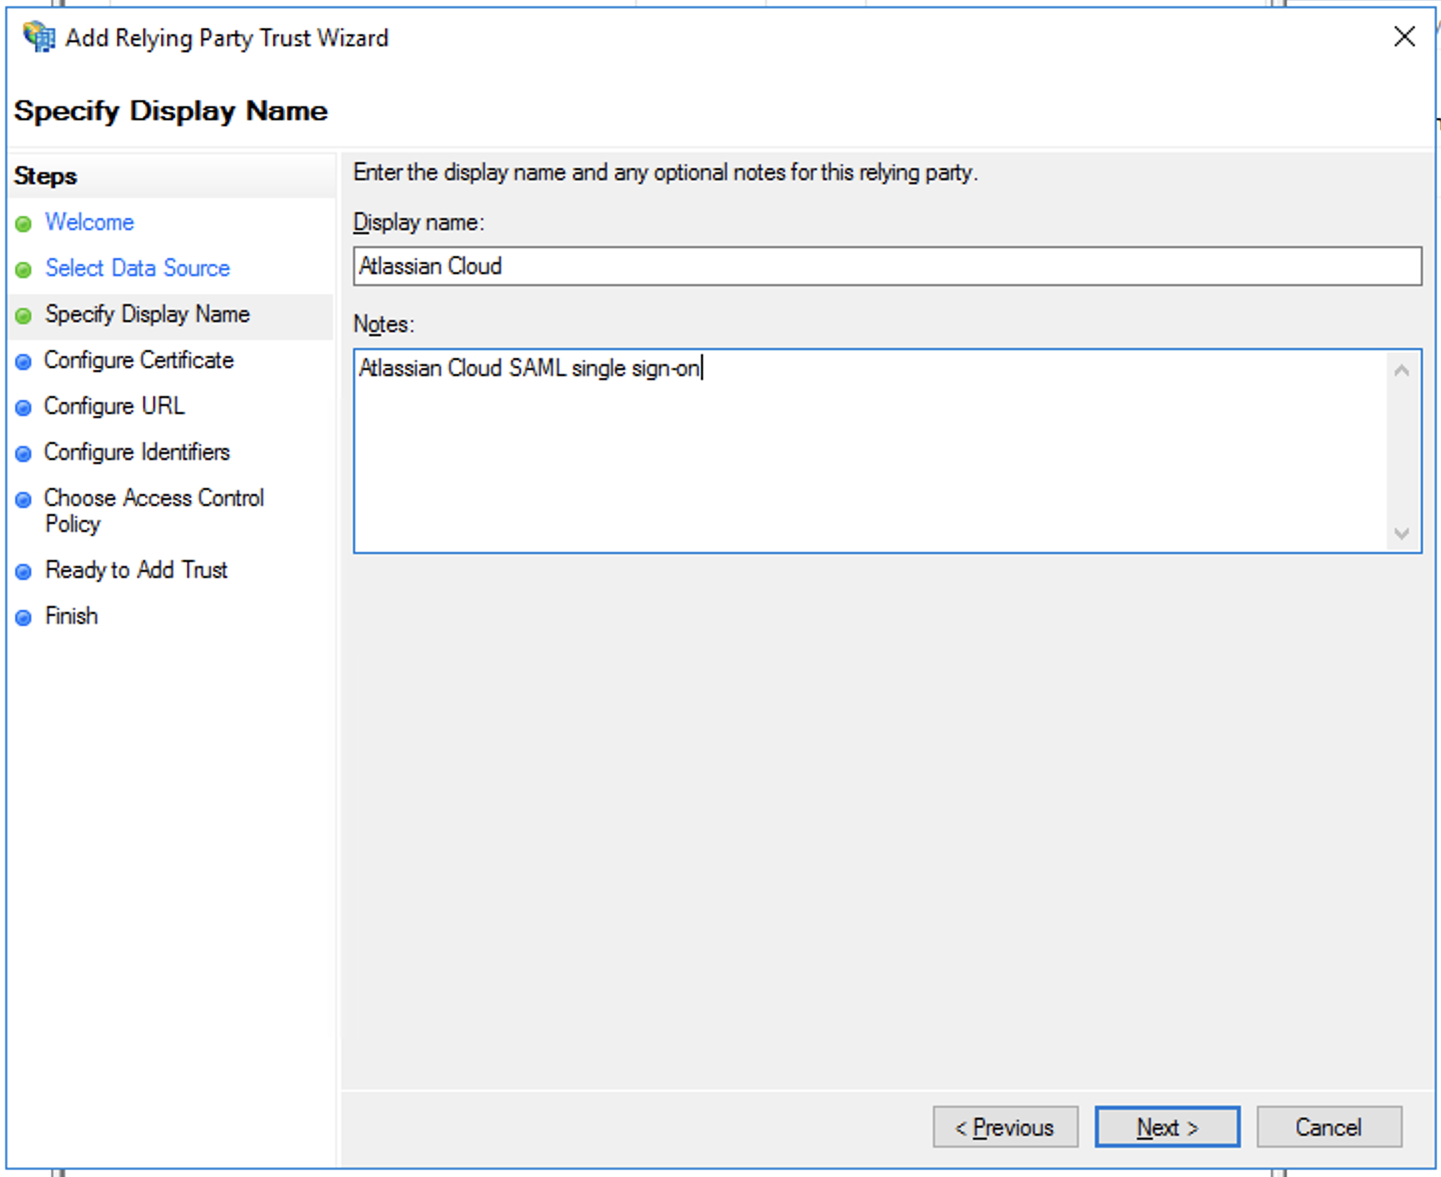 Add relying party trust wizard, specify display name step